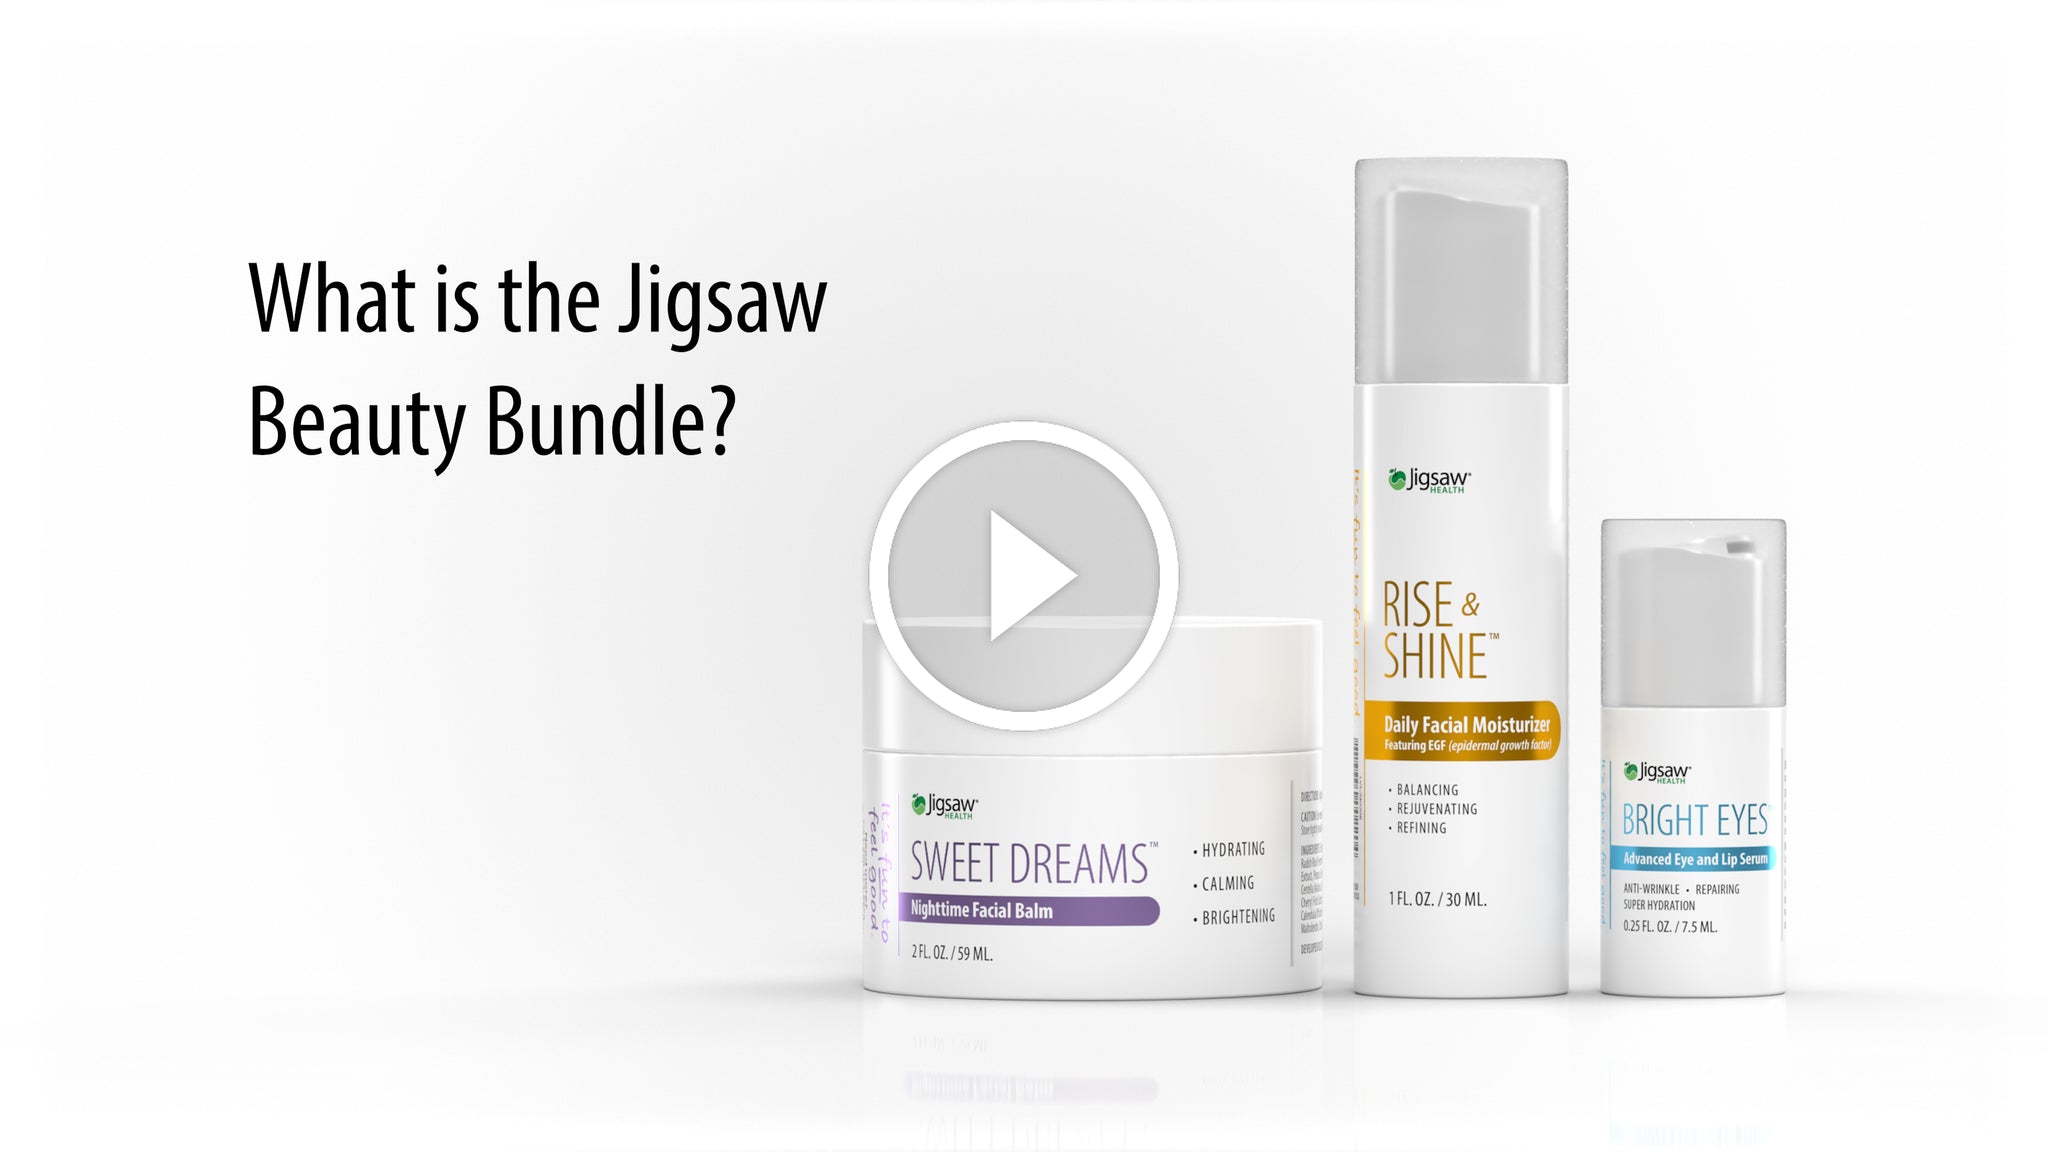 What is the Jigsaw Beauty bundle?